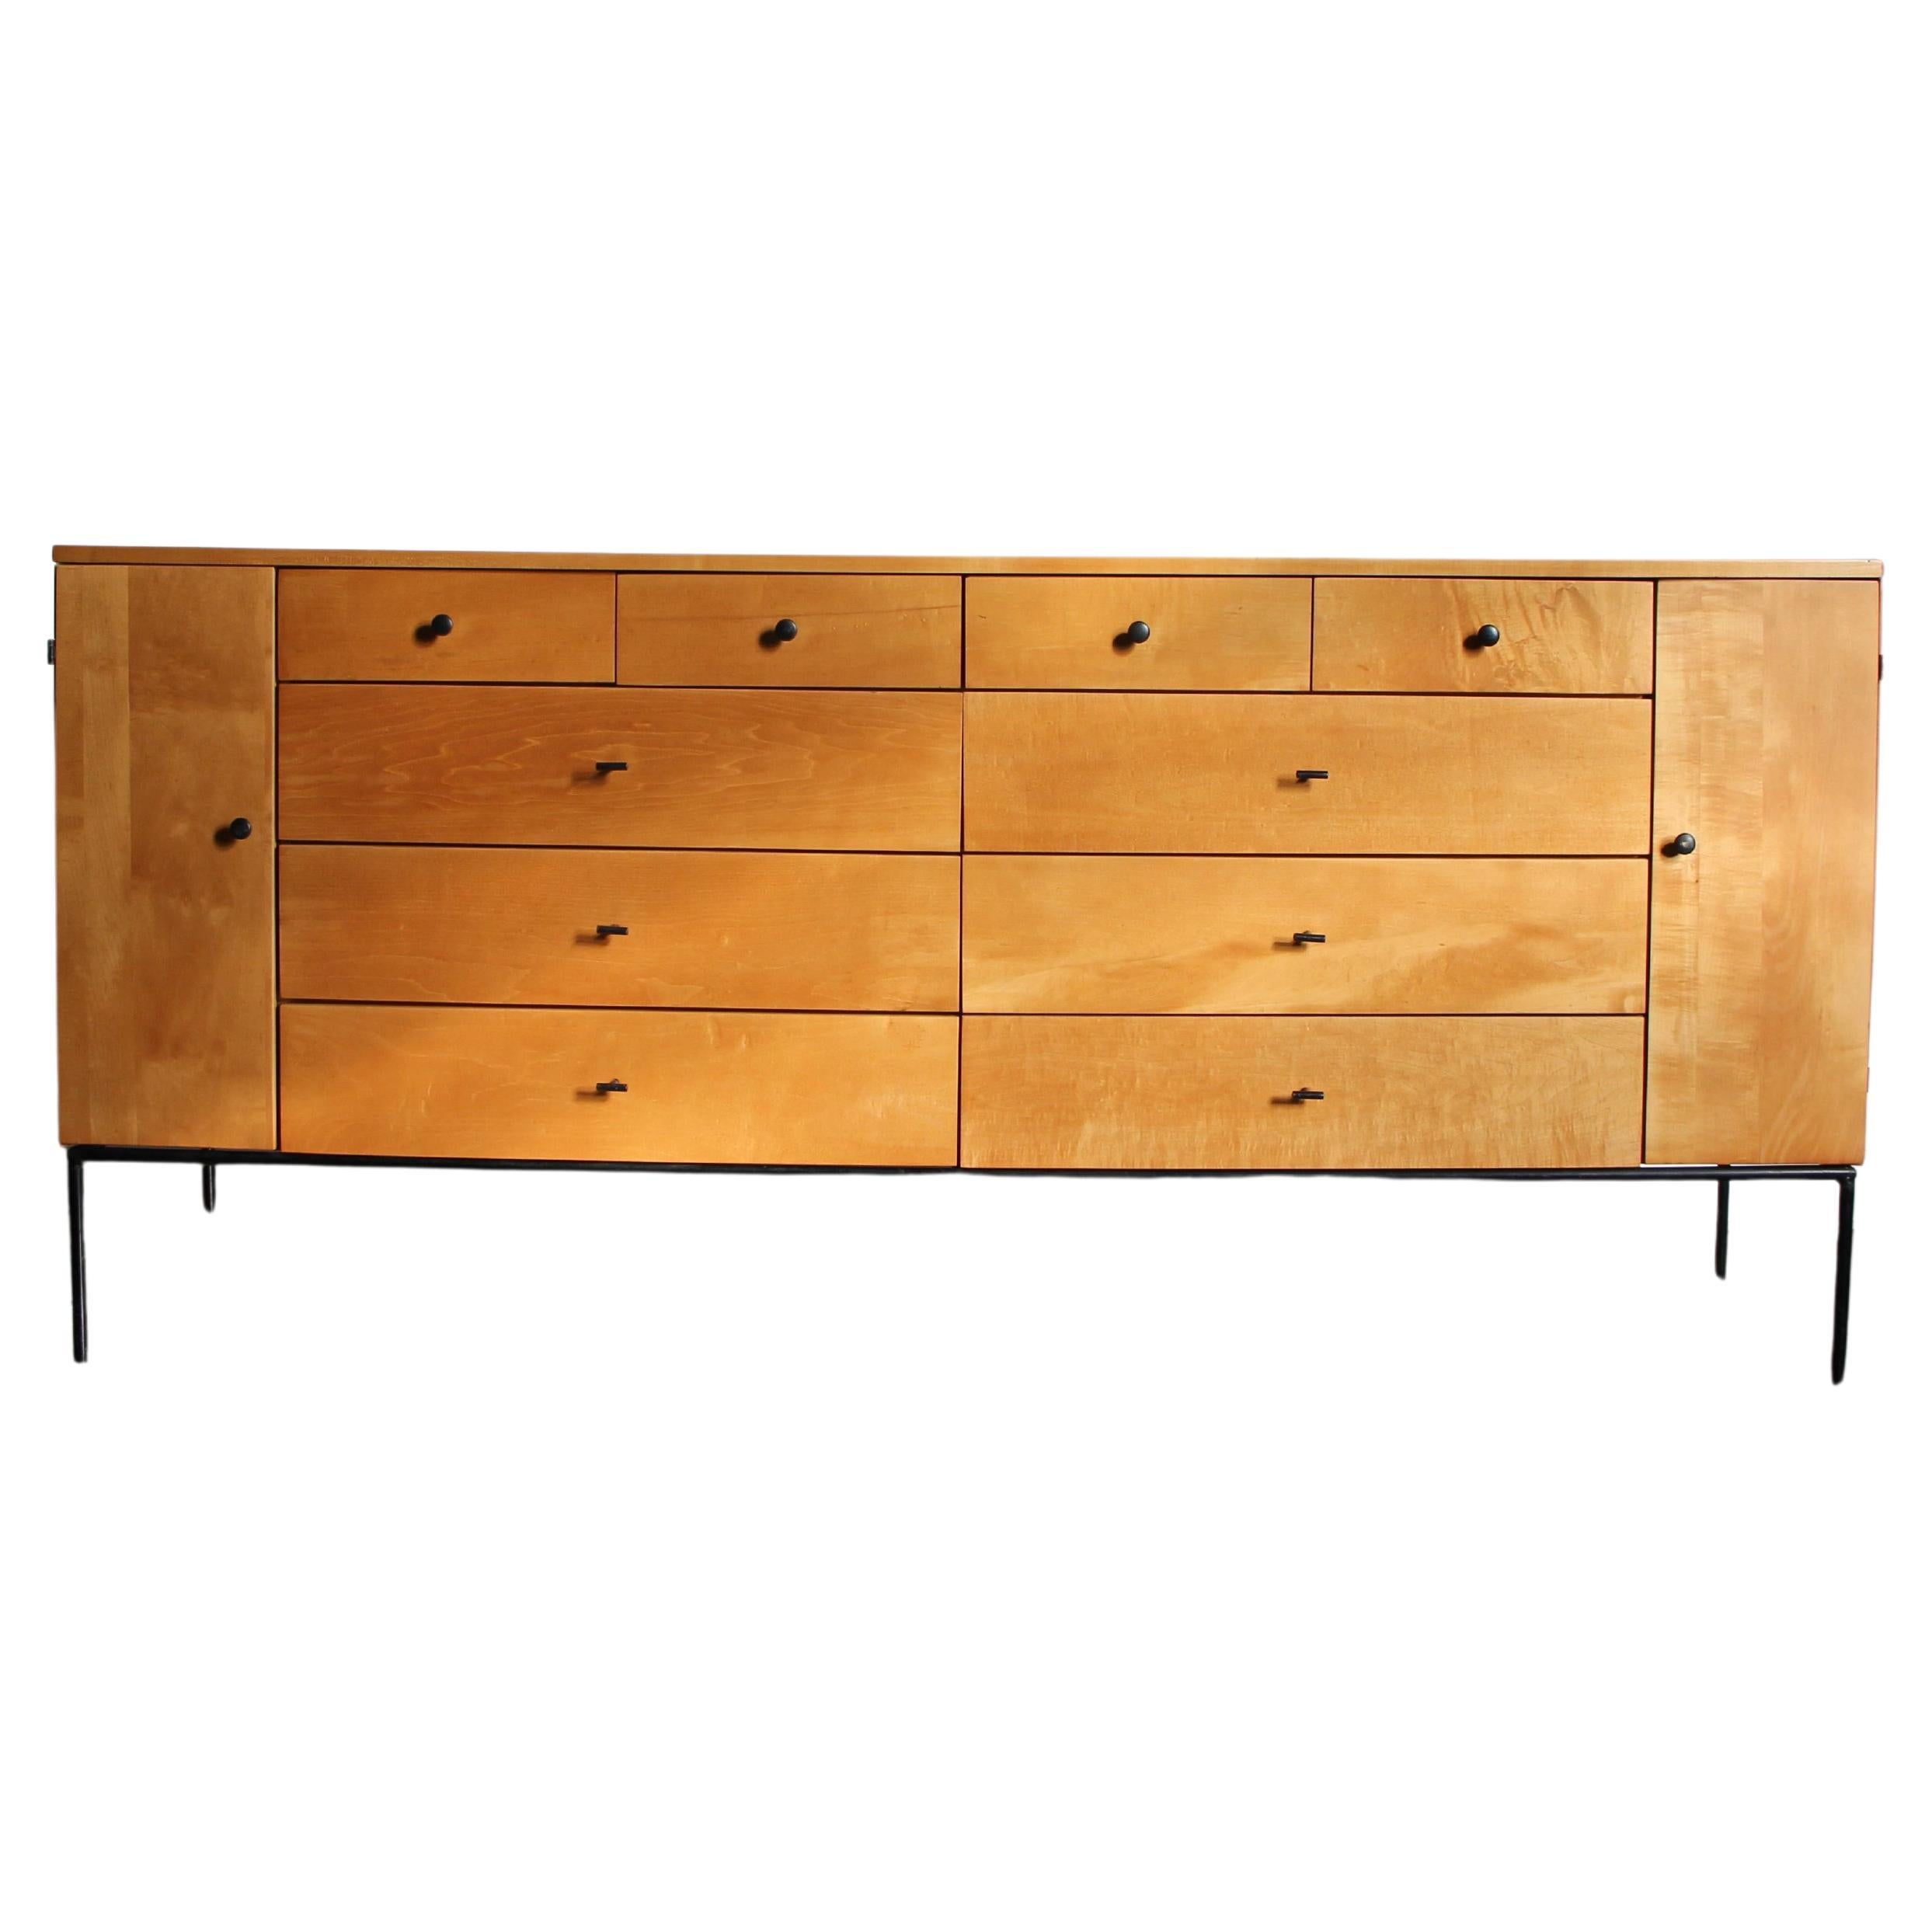 Paul McCobb Early "20-Drawer" Maple Dresser With Iron Base for Winchendon, 1950s For Sale